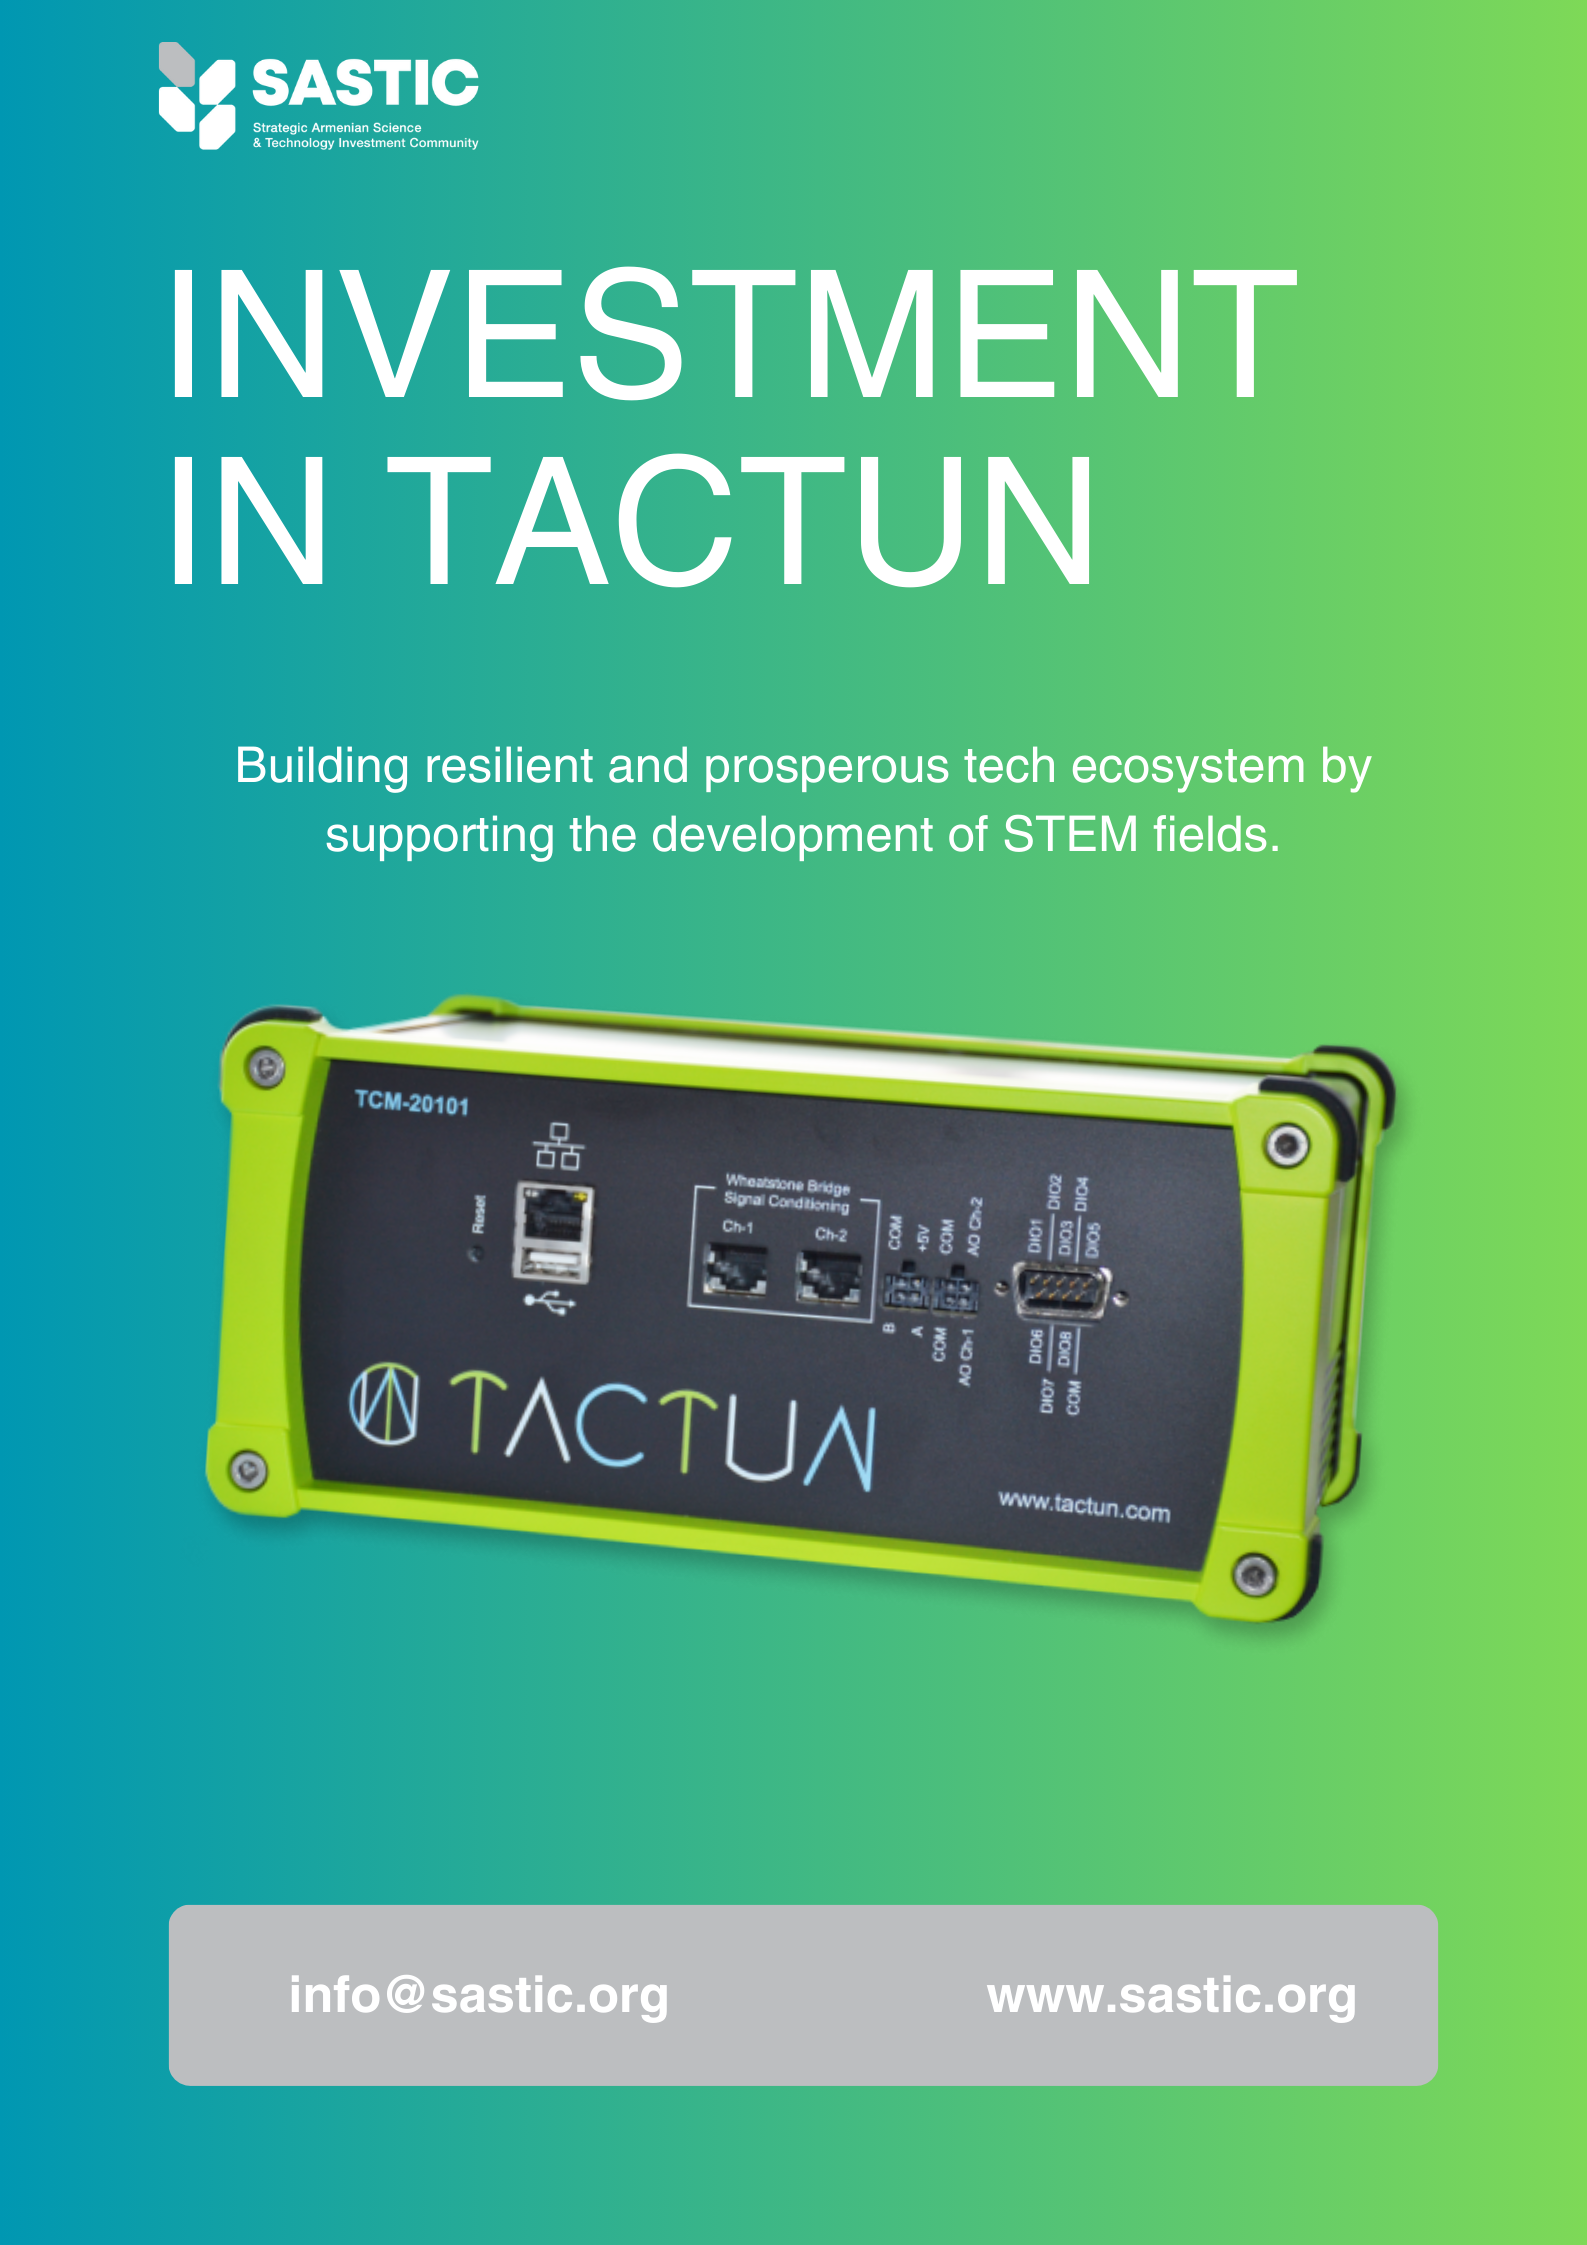 Investment in TACTUN